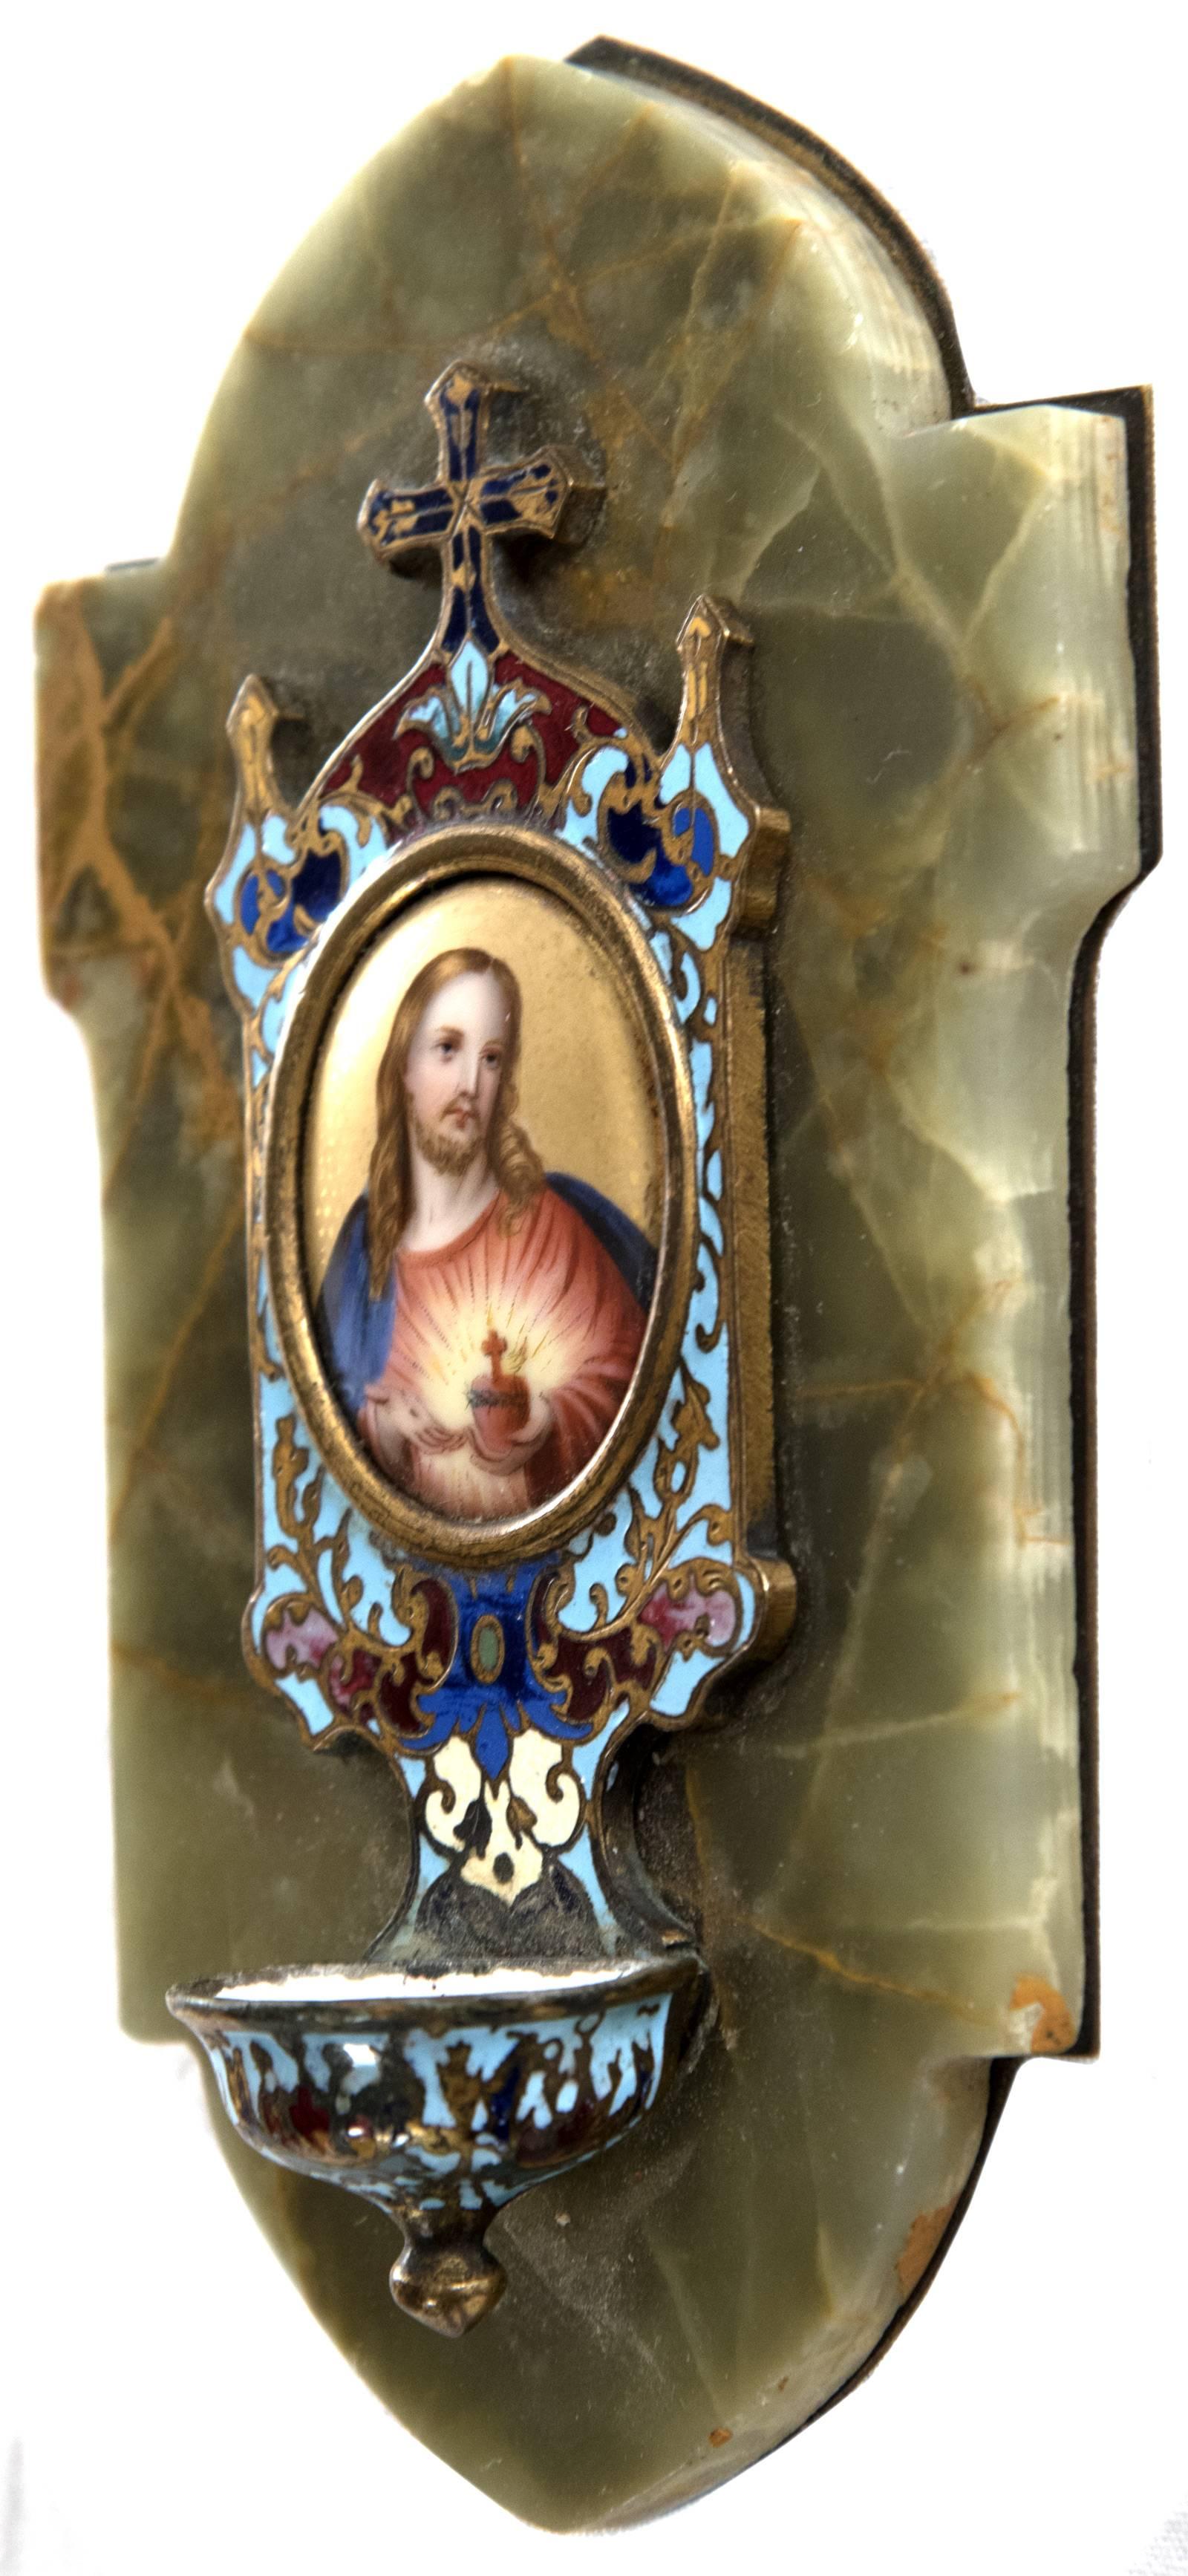 A hand-painted image of Jesus Christ on a porcelain oval is surrounded by a champleve enamel frame, with surmounting finals and centre cross, terminating in an attached water font, on green and gold-veined marble that is attached to a brass